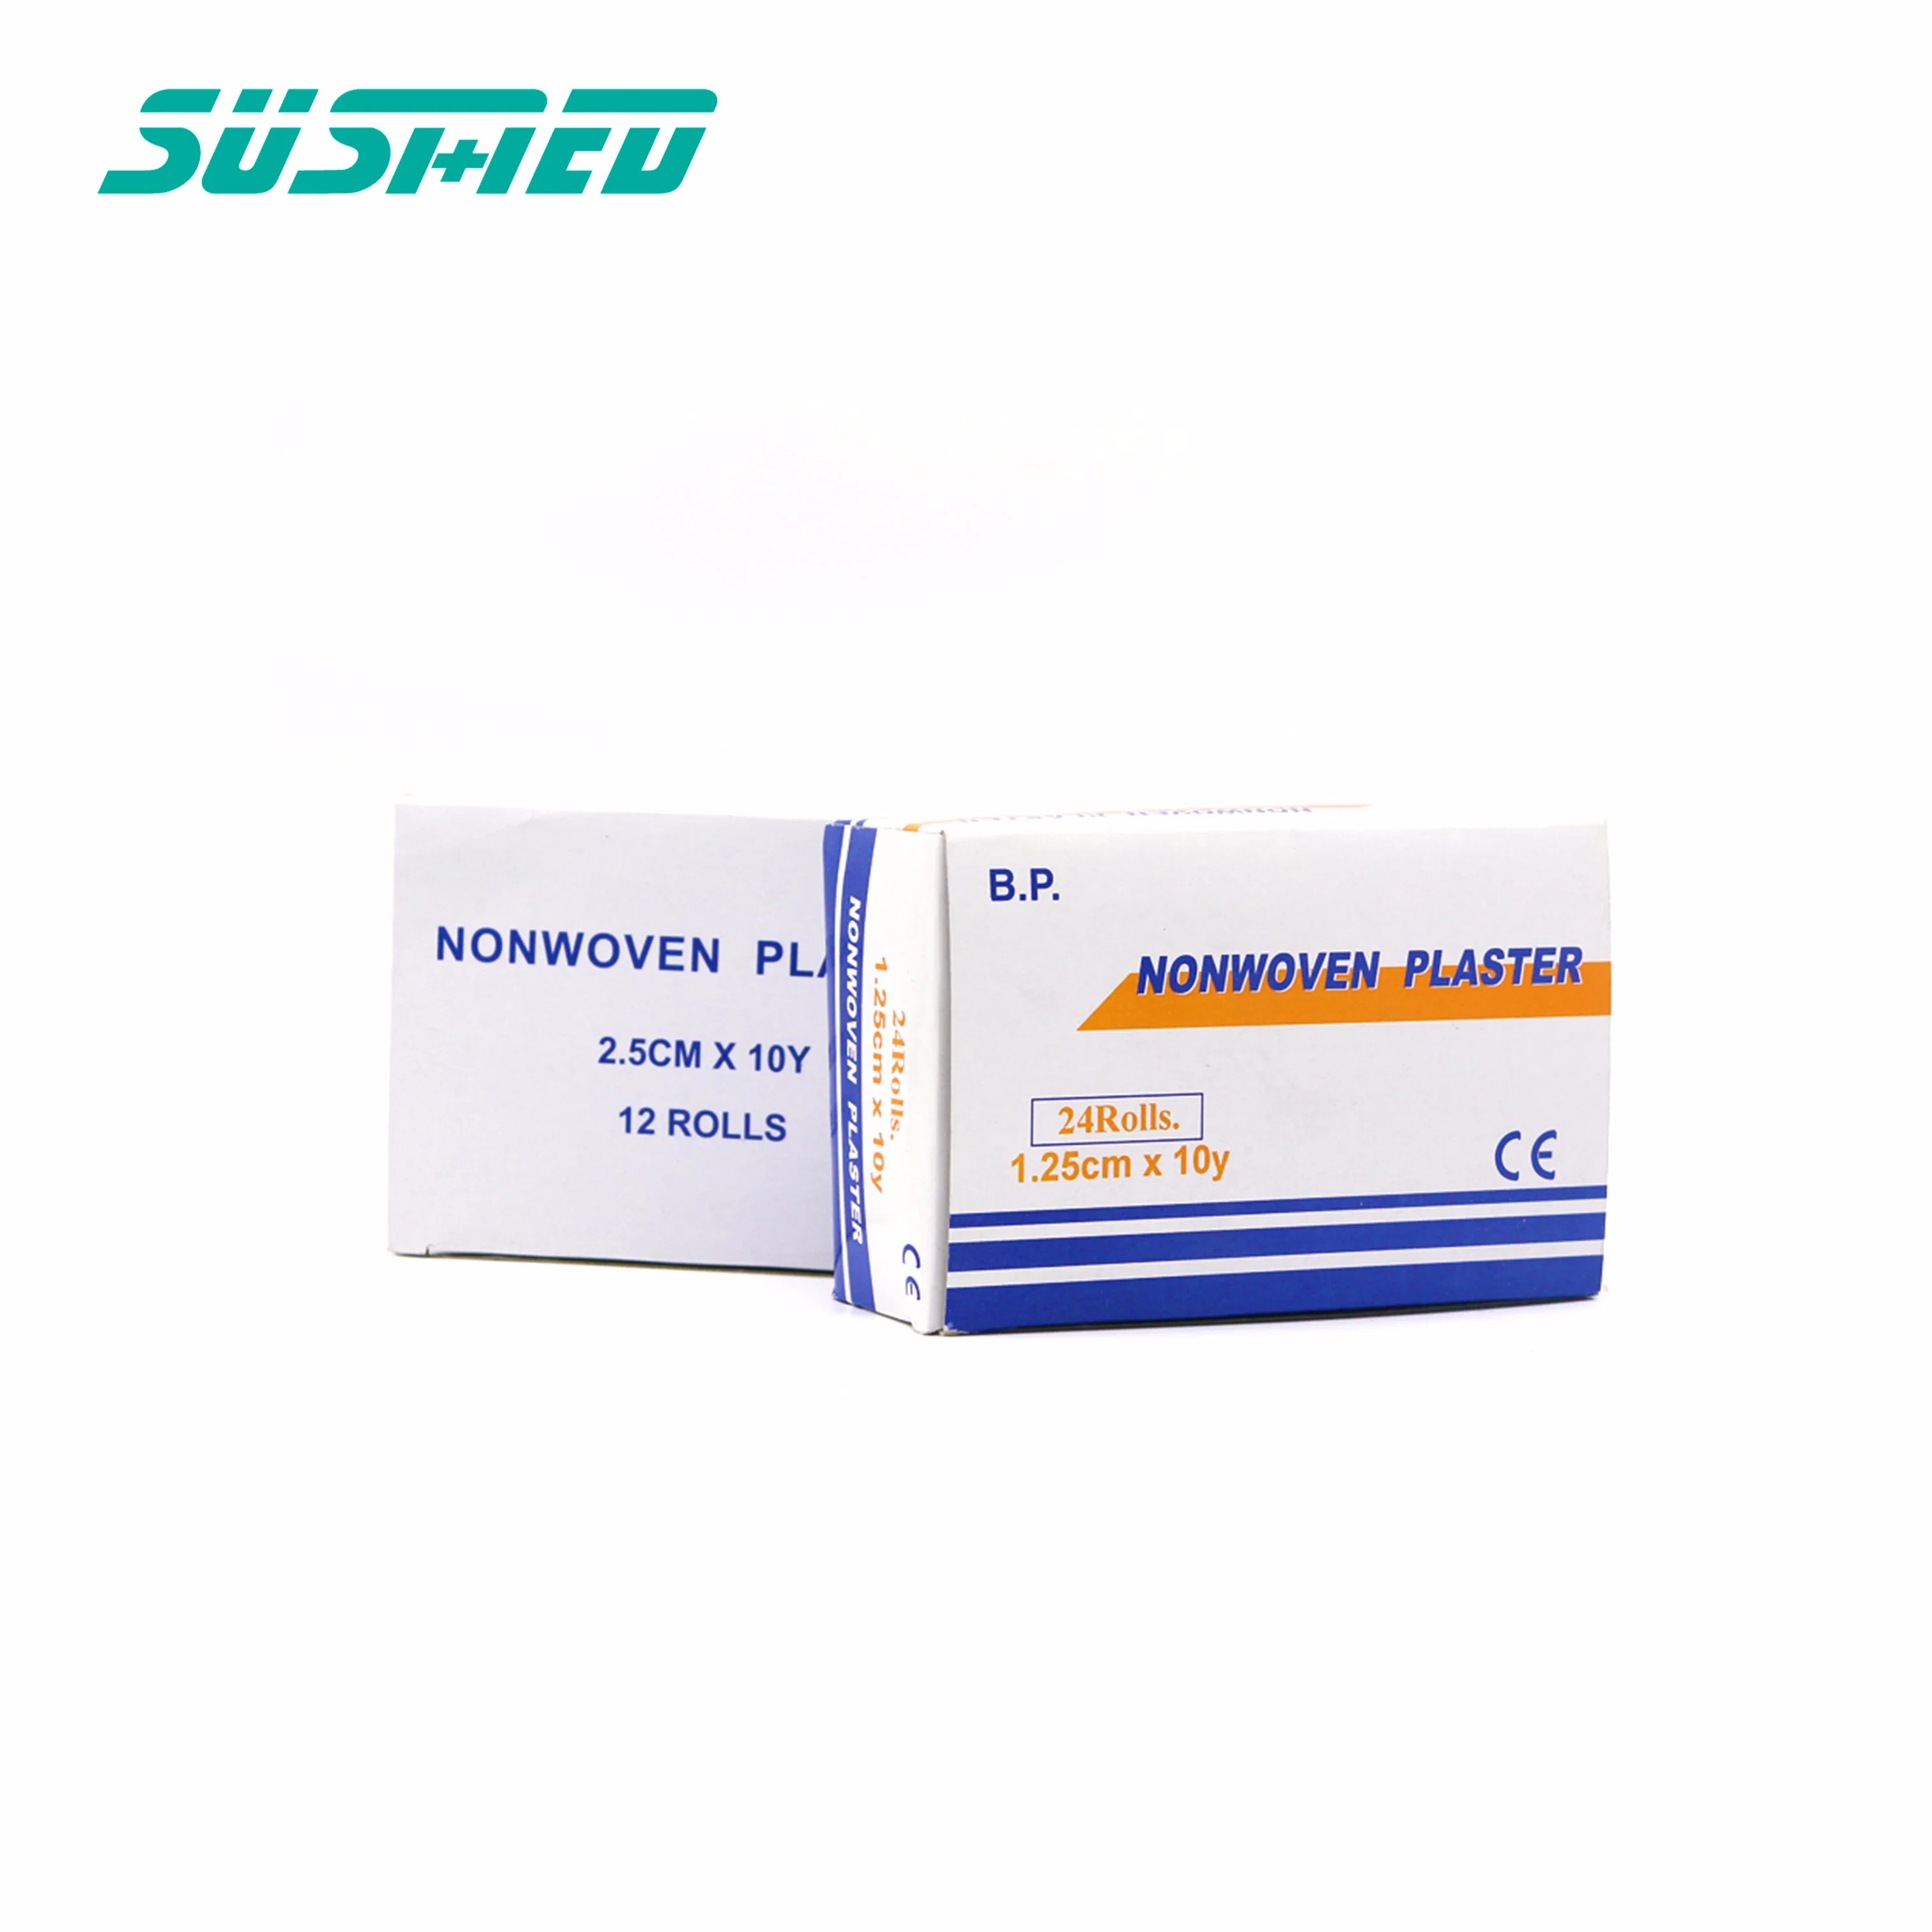 Alcohol Wipes Prep Pad for Professional and Hospital Use Antibacterial Disinfection